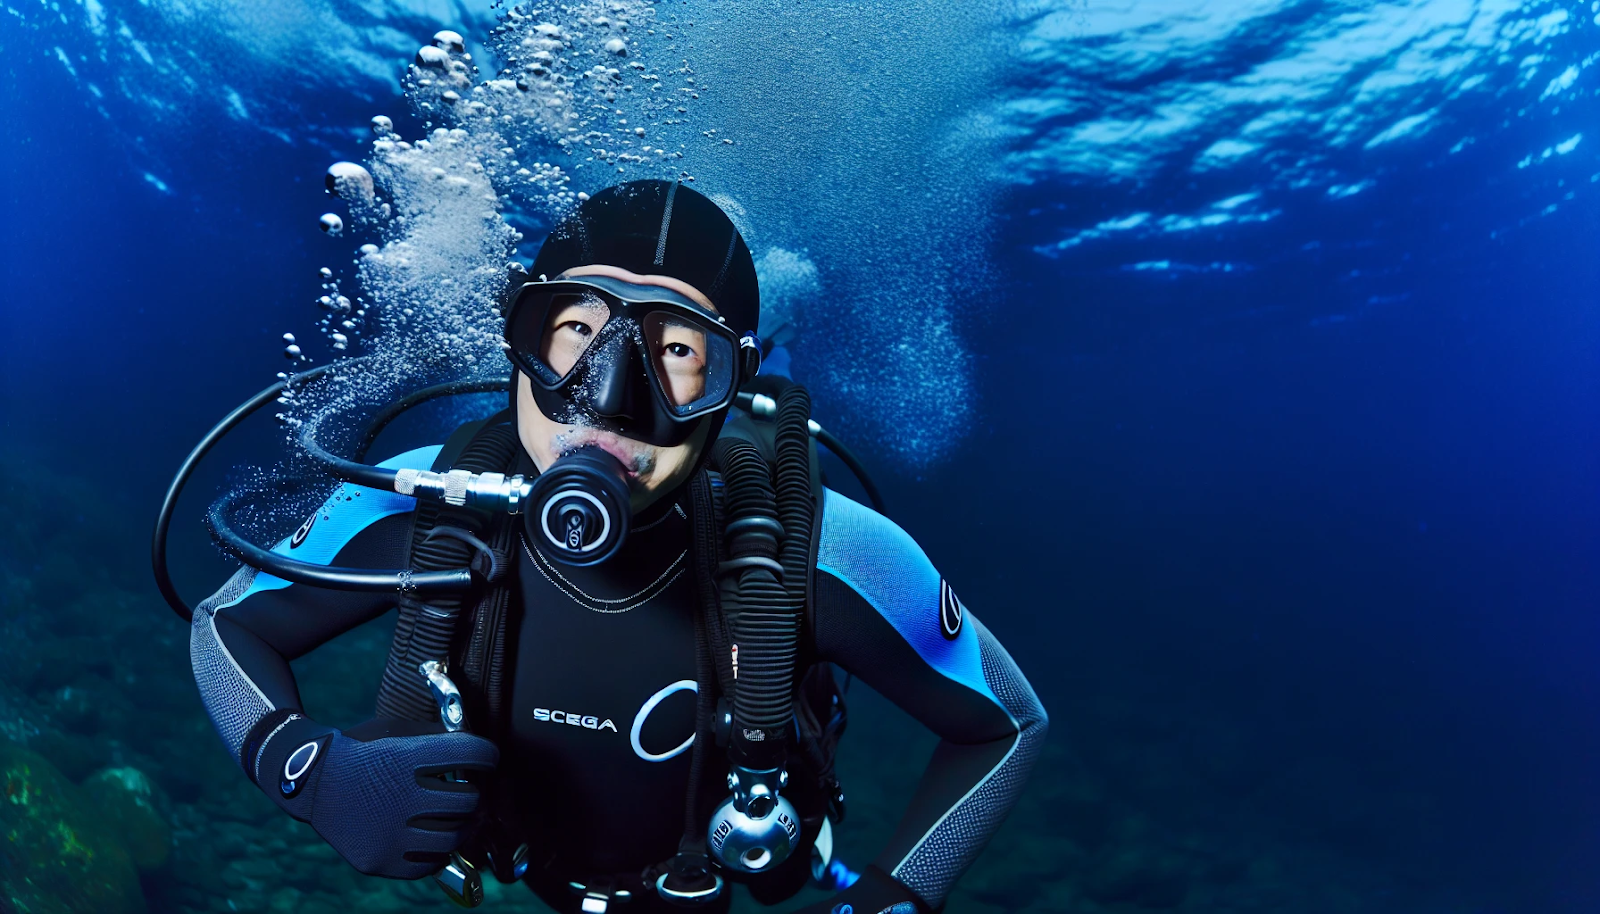 A diver wearing a high-quality scuba diving wetsuit in cold water